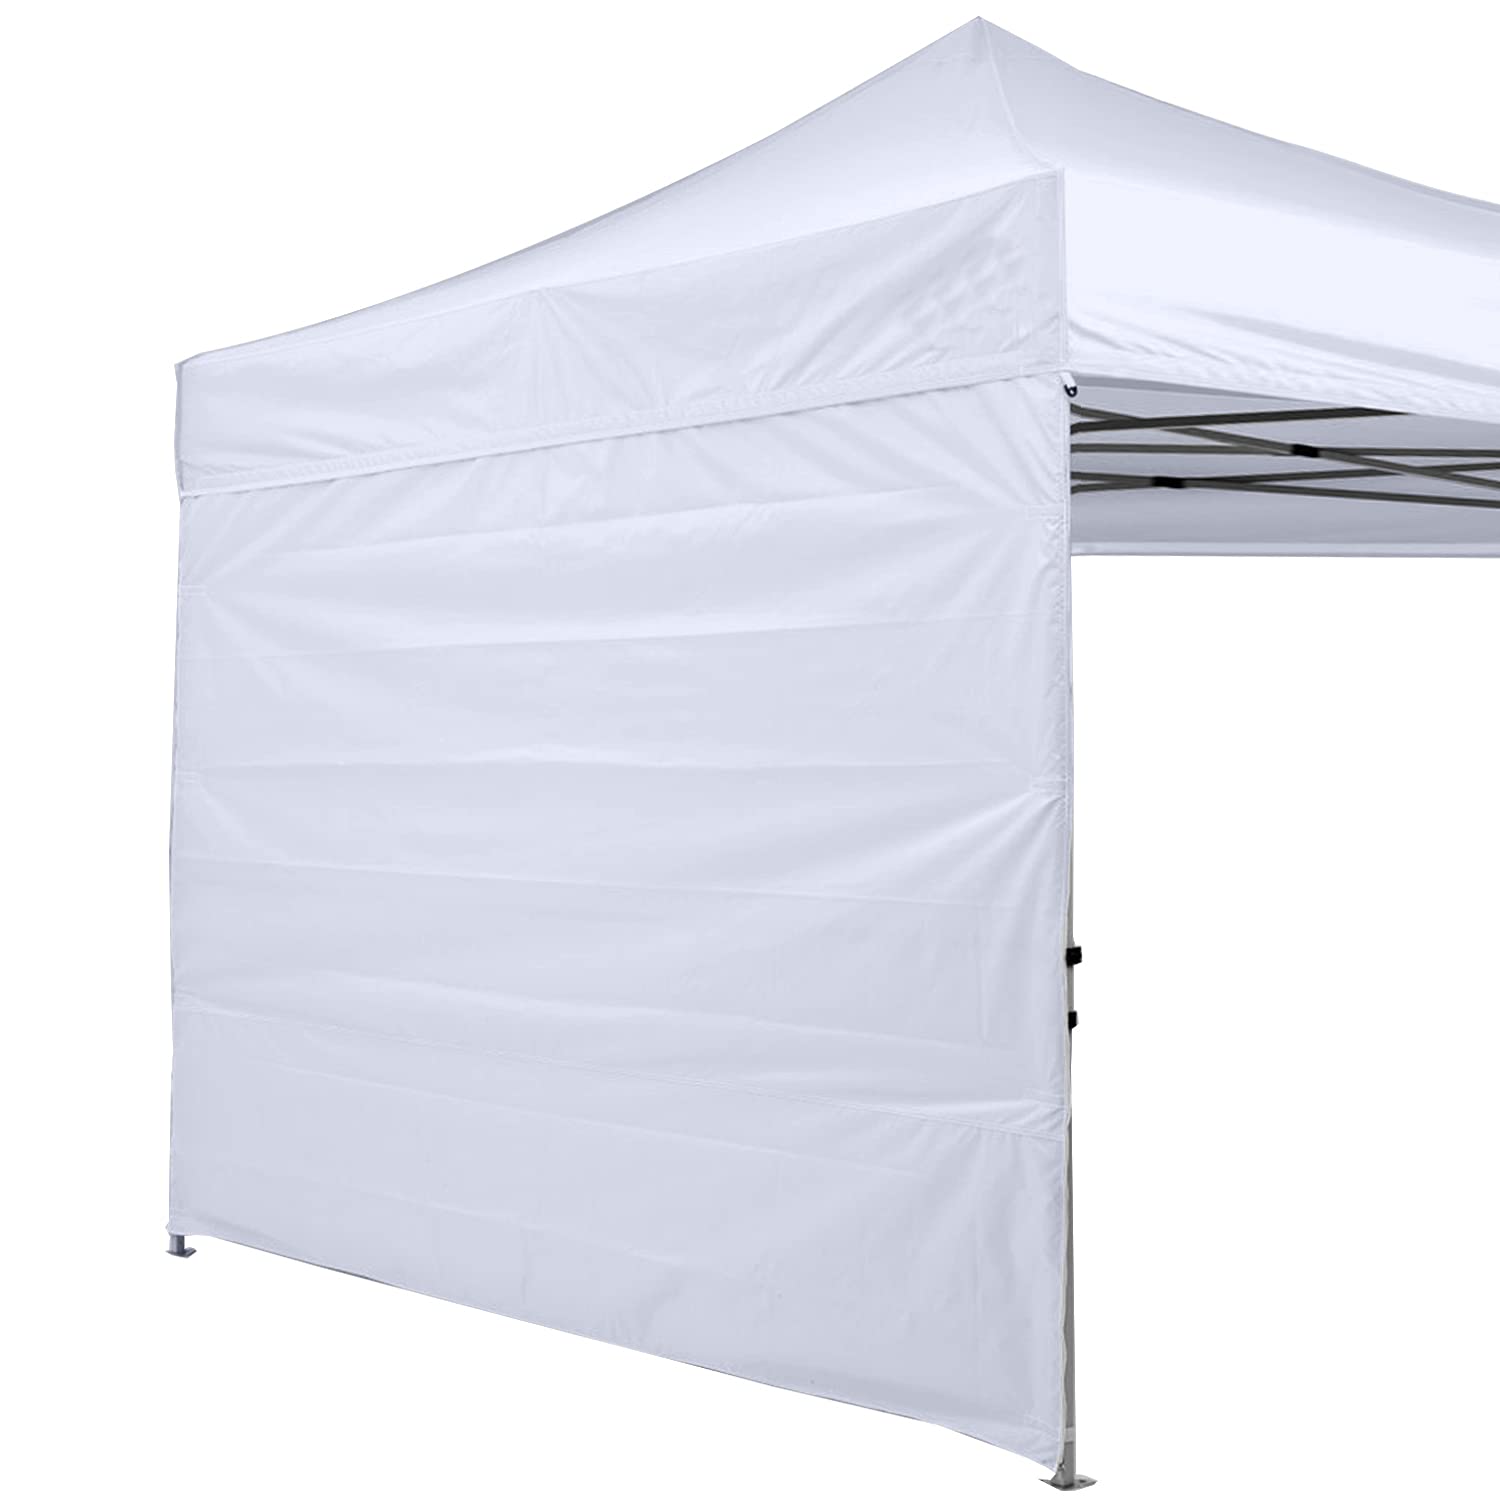 White 10x10 EZ Up Tent Wall